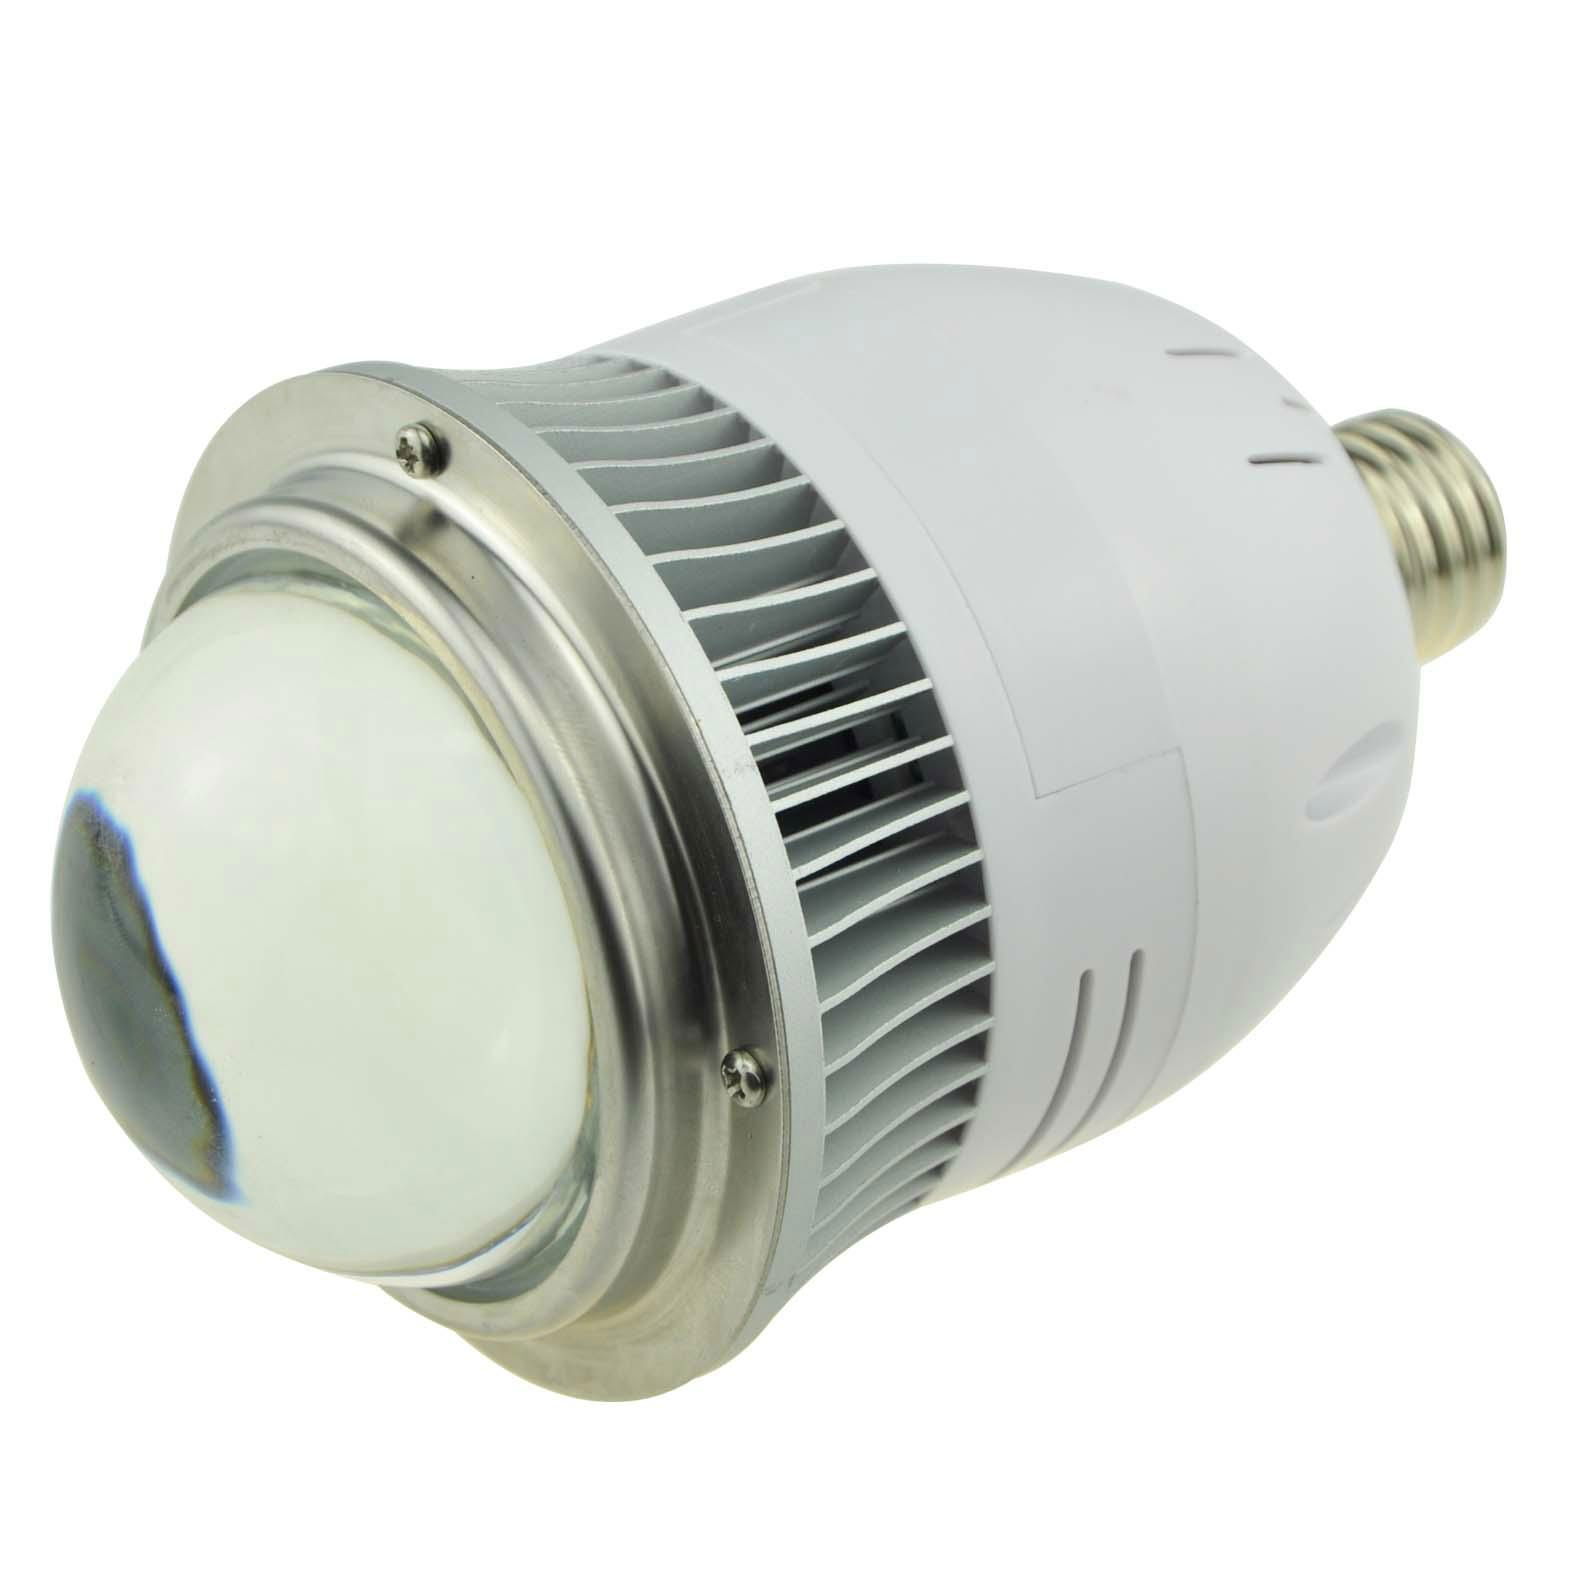 E40 LED mining lamp 60 w can replace 150 w energy-saving lamps 3